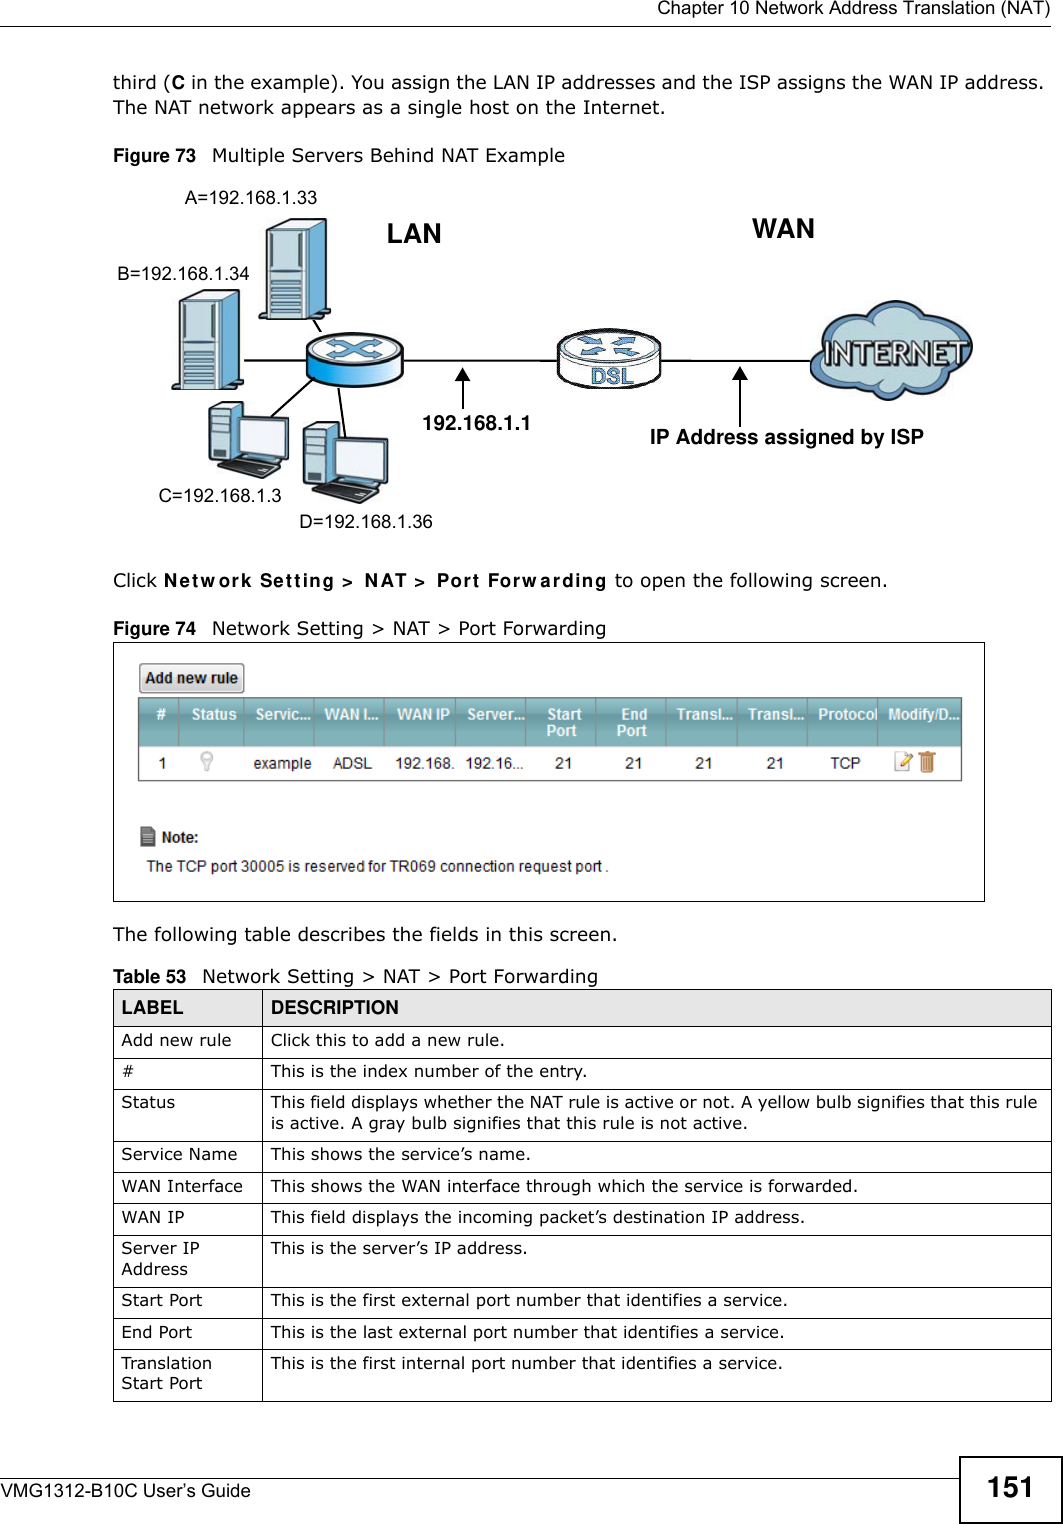  Chapter 10 Network Address Translation (NAT)VMG1312-B10C User’s Guide 151third (C in the example). You assign the LAN IP addresses and the ISP assigns the WAN IP address. The NAT network appears as a single host on the Internet.Figure 73   Multiple Servers Behind NAT ExampleClick N et w or k  Set t ing &gt;  N AT &gt;  Port  For w a rding to open the following screen.Figure 74   Network Setting &gt; NAT &gt; Port ForwardingThe following table describes the fields in this screen. Table 53   Network Setting &gt; NAT &gt; Port ForwardingLABEL DESCRIPTIONAdd new rule Click this to add a new rule.#This is the index number of the entry.Status This field displays whether the NAT rule is active or not. A yellow bulb signifies that this rule is active. A gray bulb signifies that this rule is not active.Service Name This shows the service’s name.WAN Interface This shows the WAN interface through which the service is forwarded.WAN IP This field displays the incoming packet’s destination IP address.Server IP AddressThis is the server’s IP address.Start Port  This is the first external port number that identifies a service.End Port  This is the last external port number that identifies a service.Translation Start Port This is the first internal port number that identifies a service.A=192.168.1.33D=192.168.1.36C=192.168.1.3B=192.168.1.34WANLAN192.168.1.1 IP Address assigned by ISP